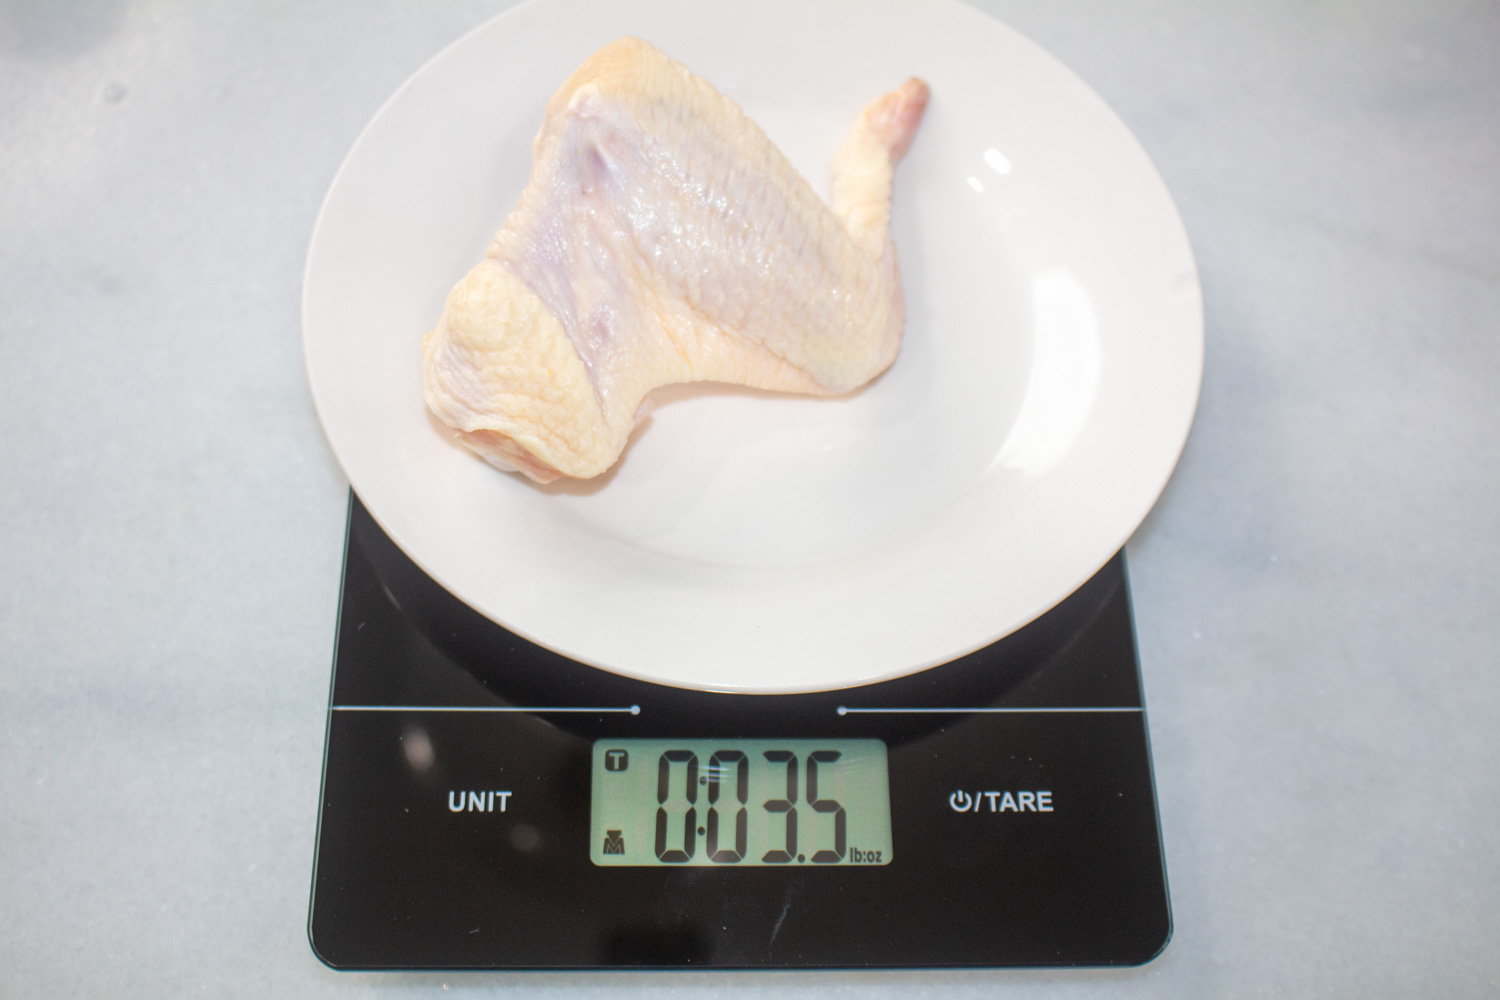 A whole chicken wing on a scale reading 3.5 oz.